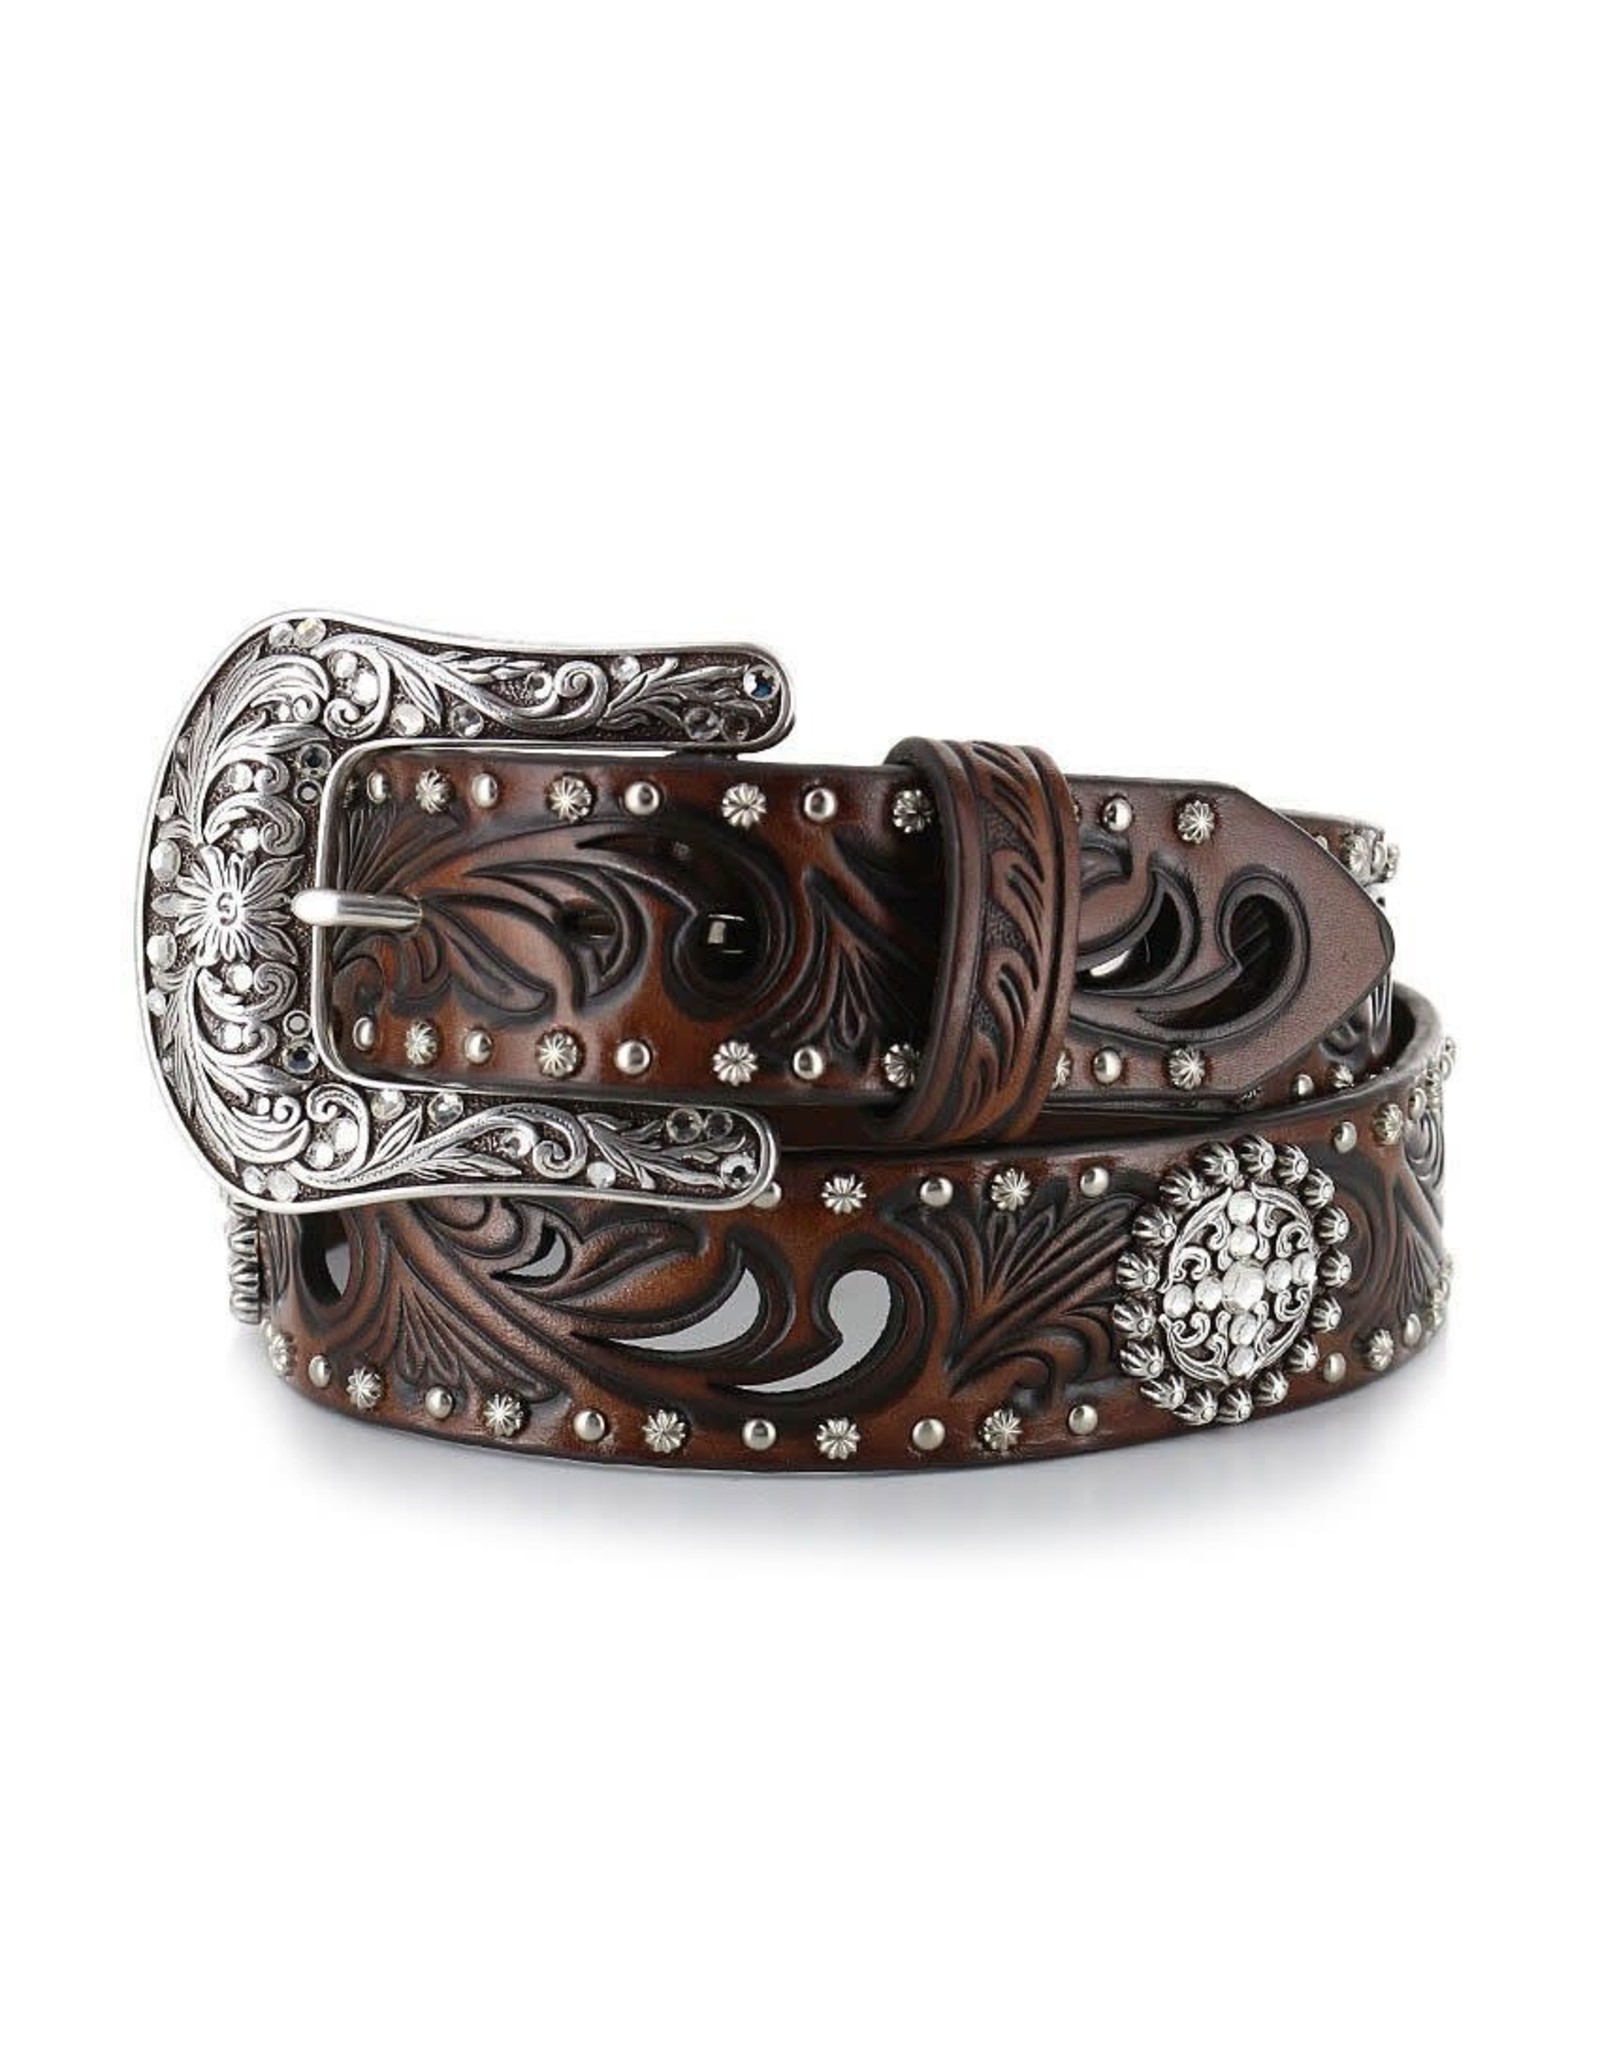 Ariat Women's Brown Filagree A1518602 Studded Concho Belt